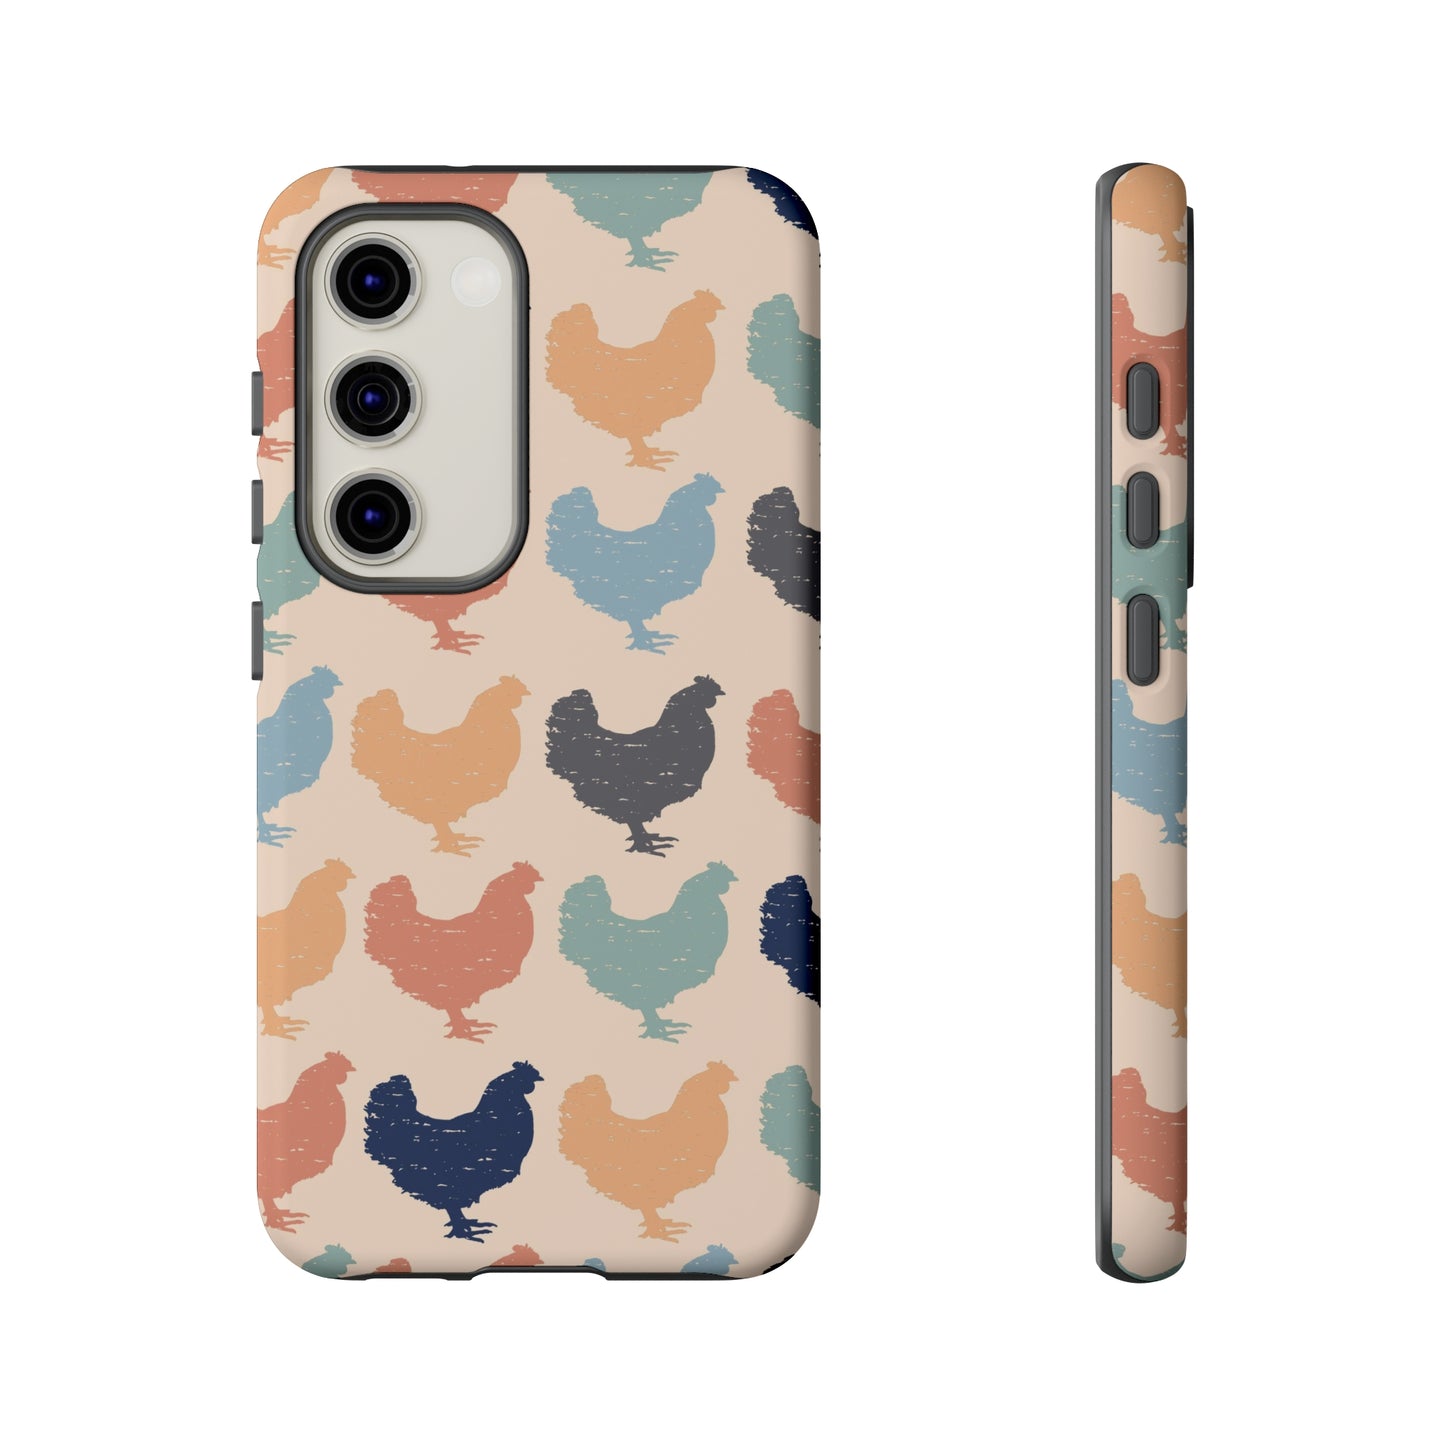 Colorful Chicken Tough Cases Samsung and Google